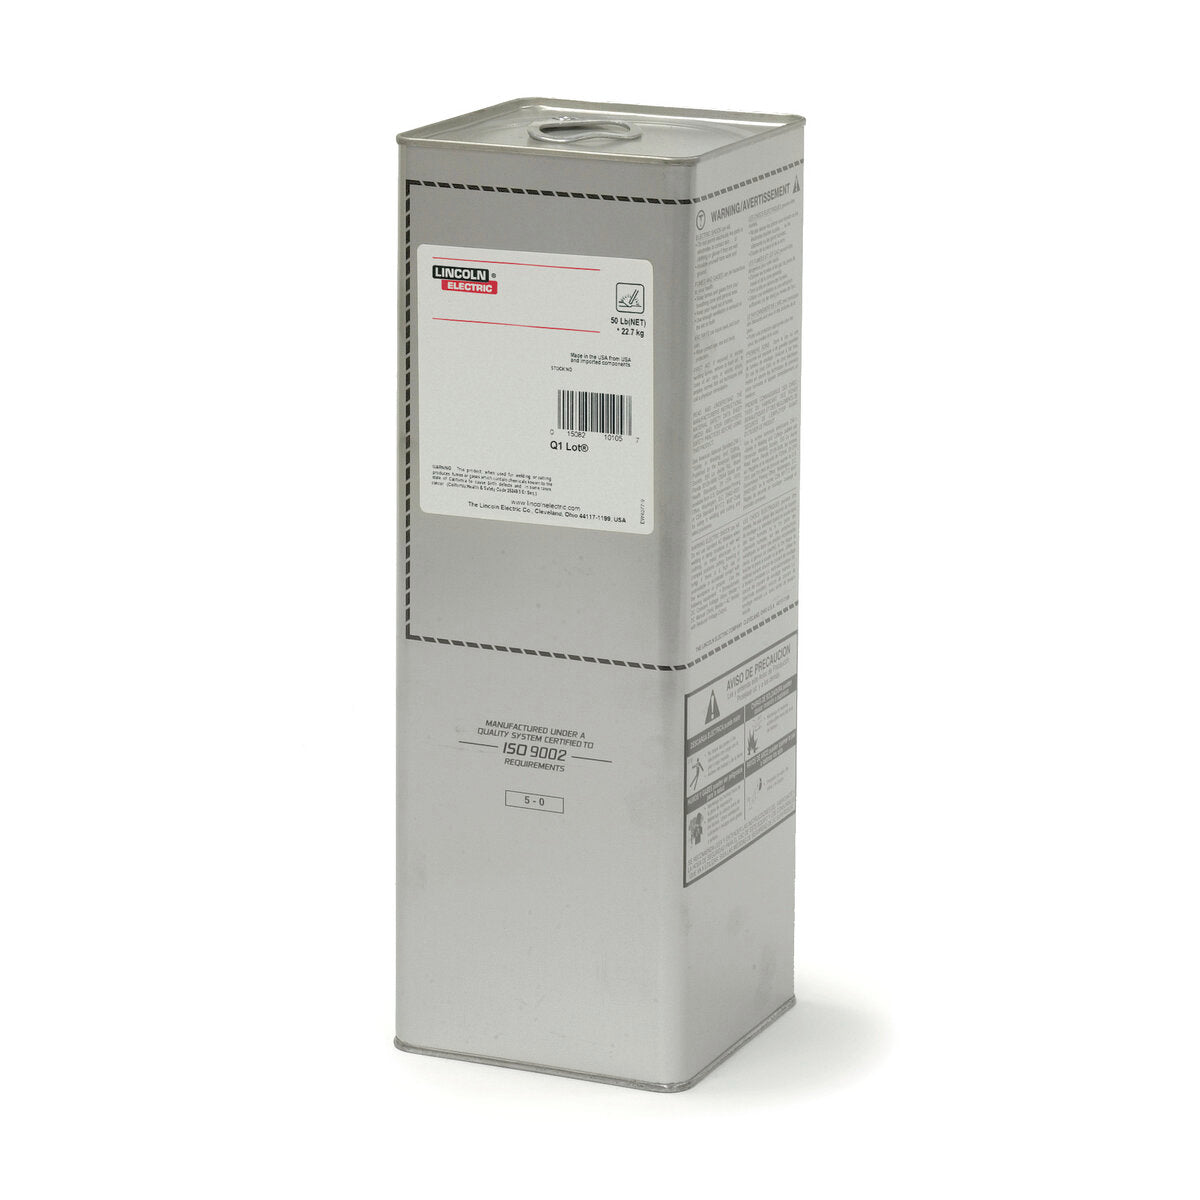 Lincoln Electric - Excalibur® 7028 Stick (SMAW) Electrode, 5/32x14 in, 50 lb Easy Open Can - ED032636